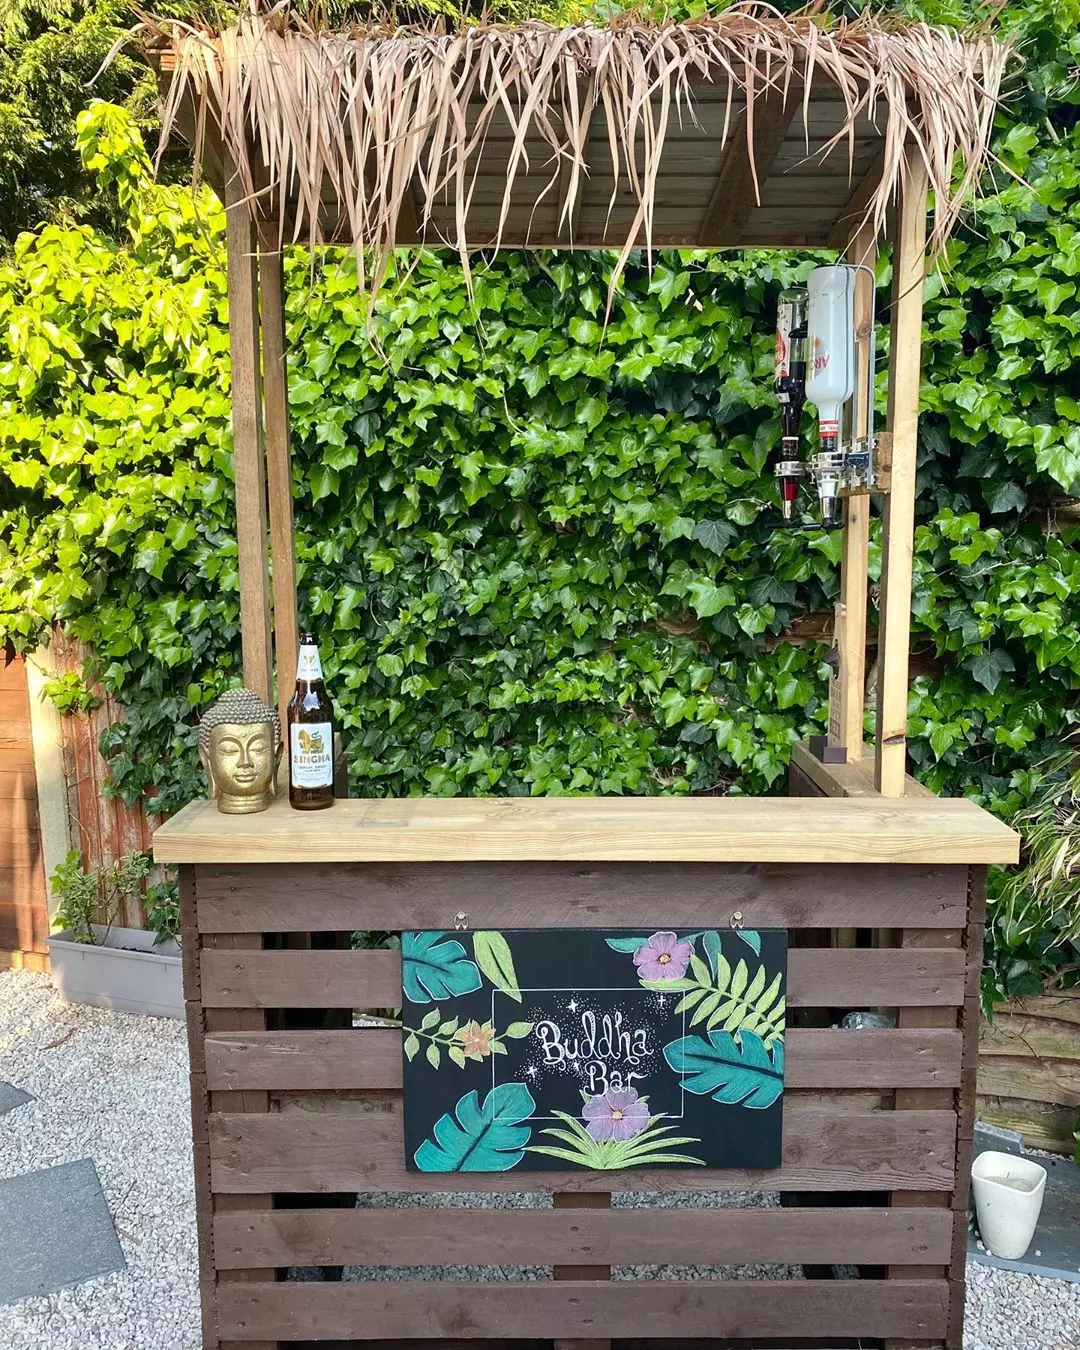 We love Instagrammer Holly Lander's Tiki hideaway complete with chalkboard sign and Buddha (